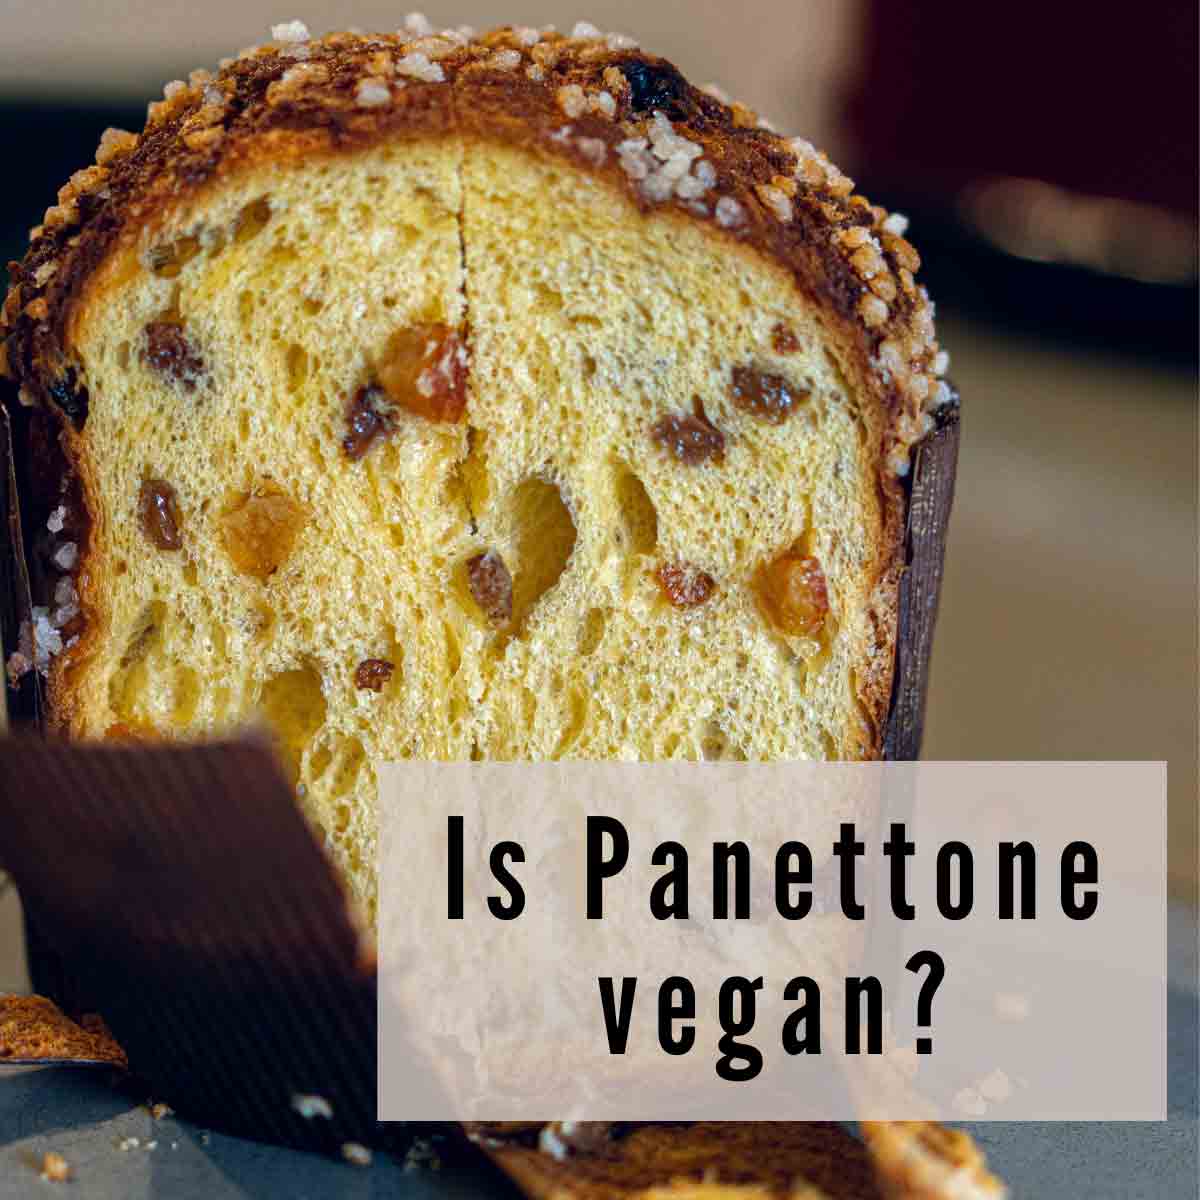 Image Of Panettone With Text Overlay That Reads Is Panettone Vegan